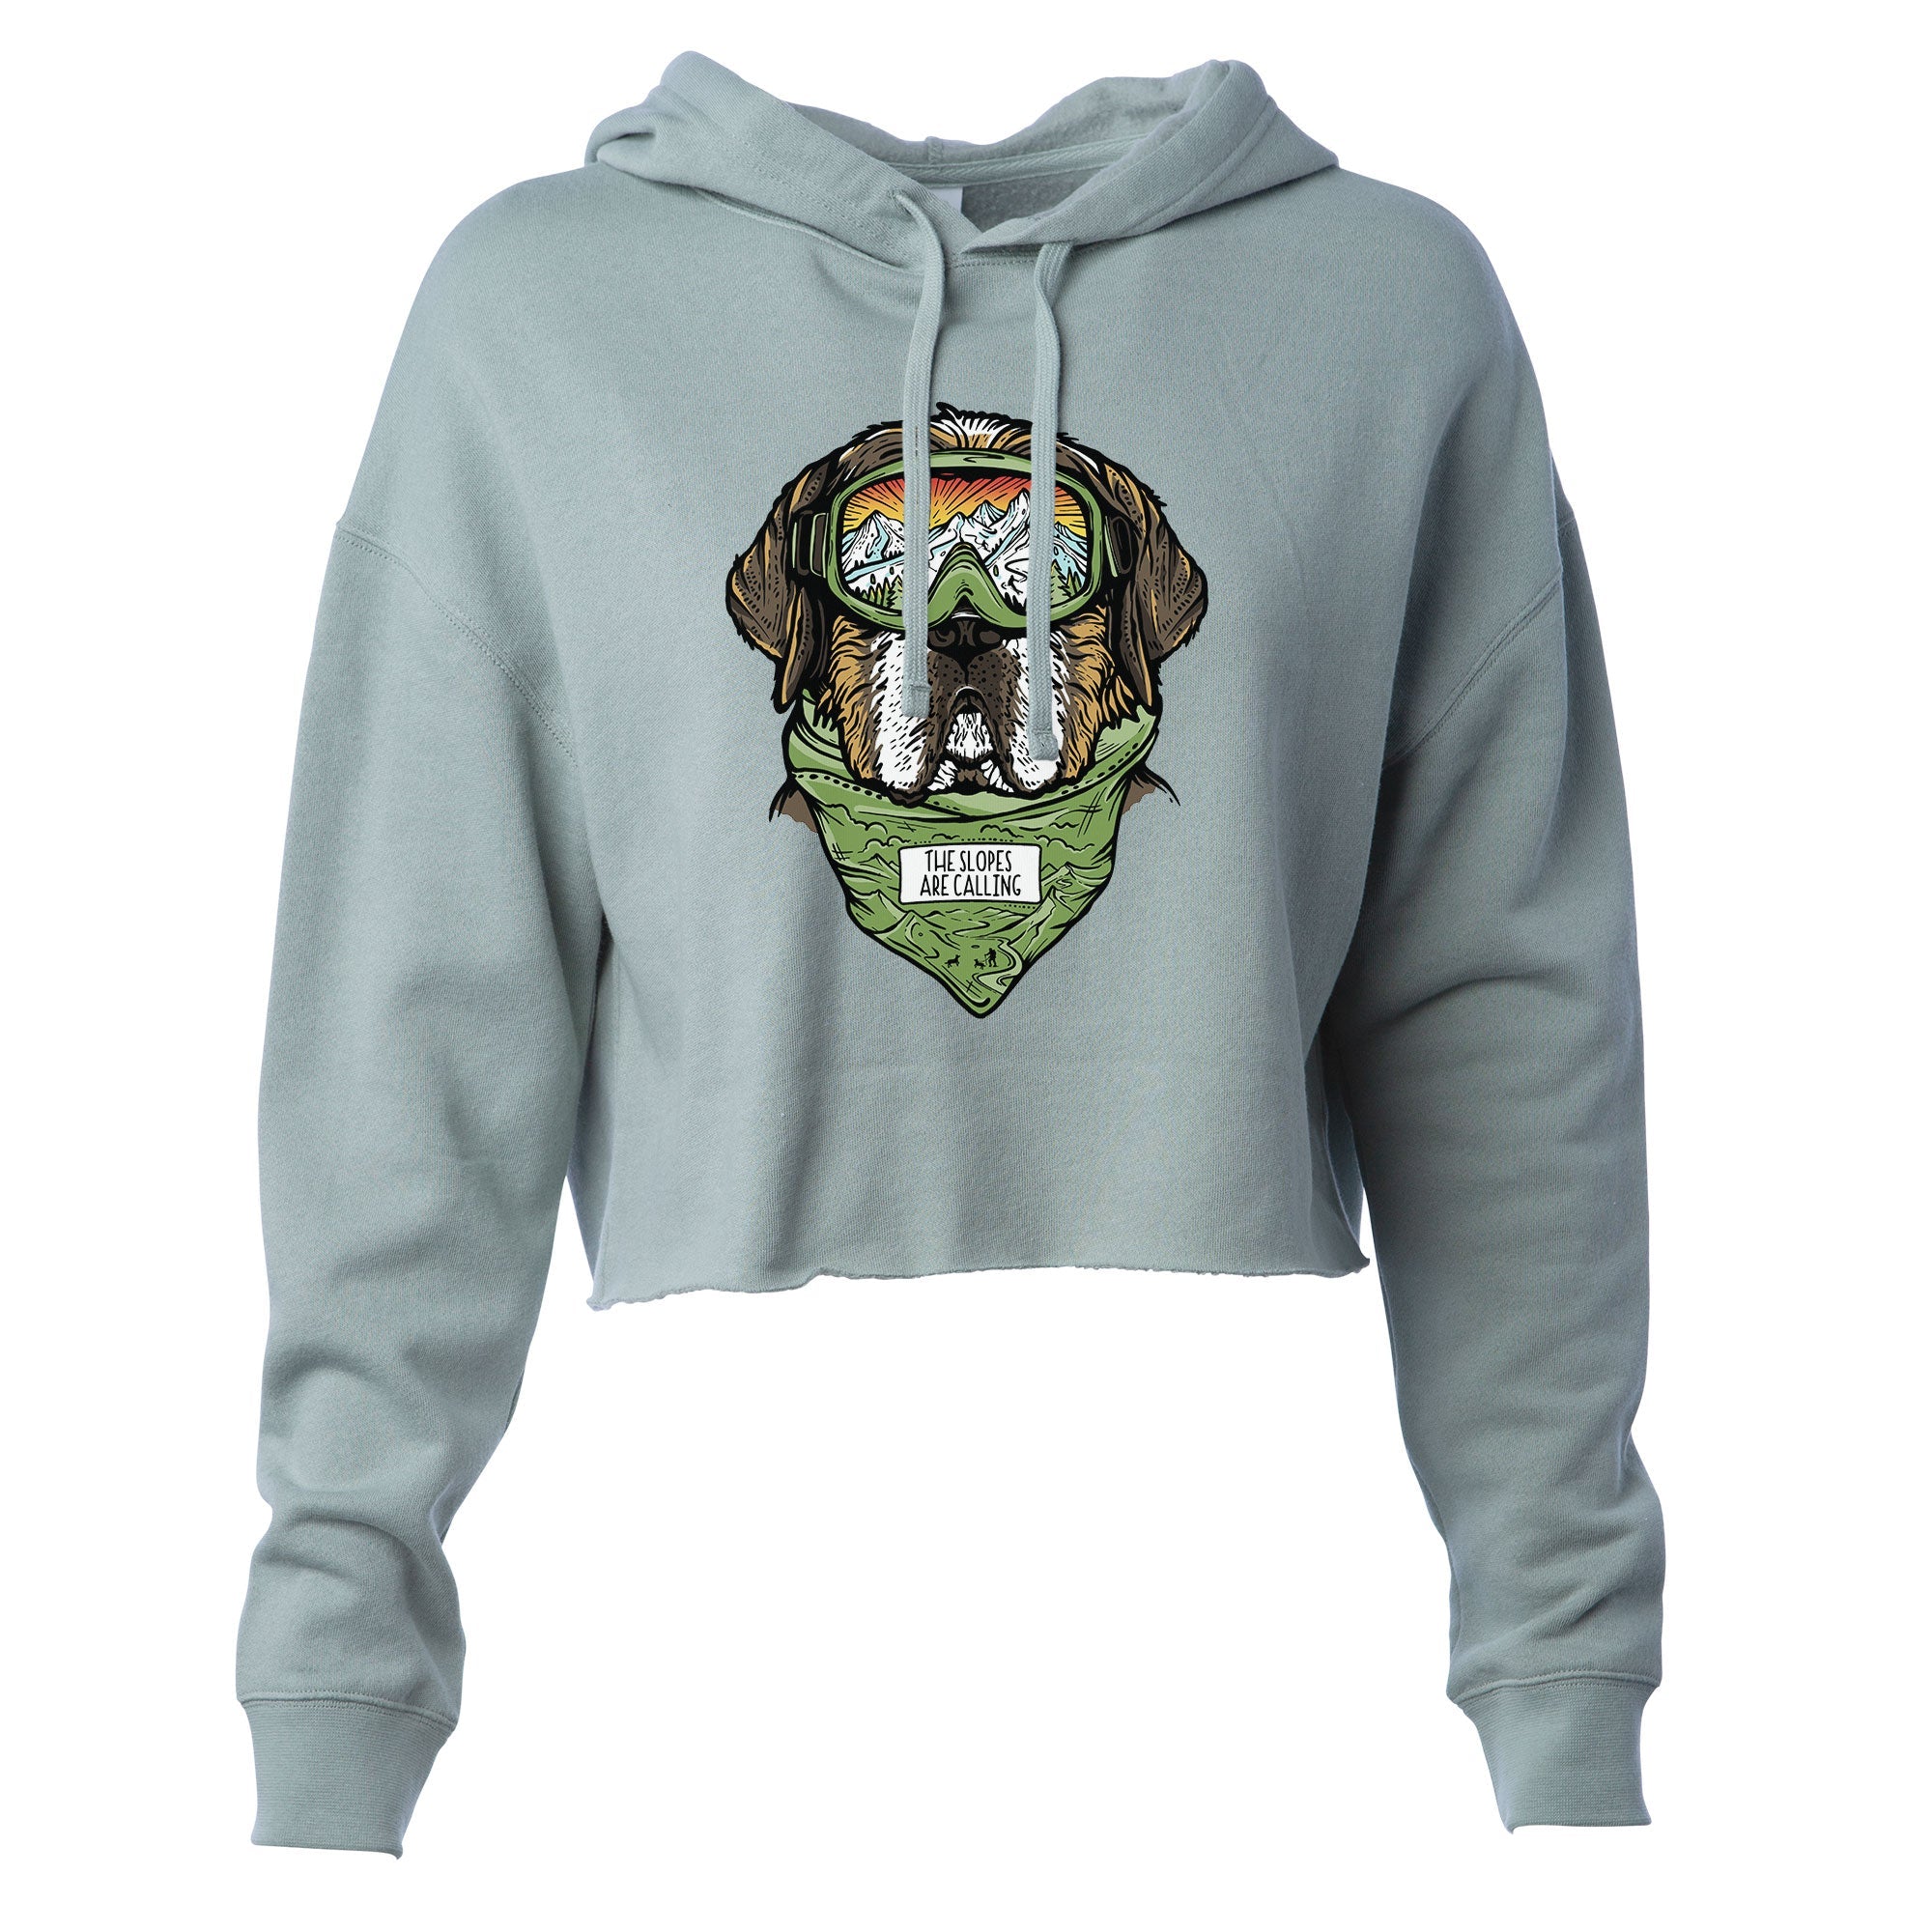 Slopes are Calling Women's Crop Hoodie